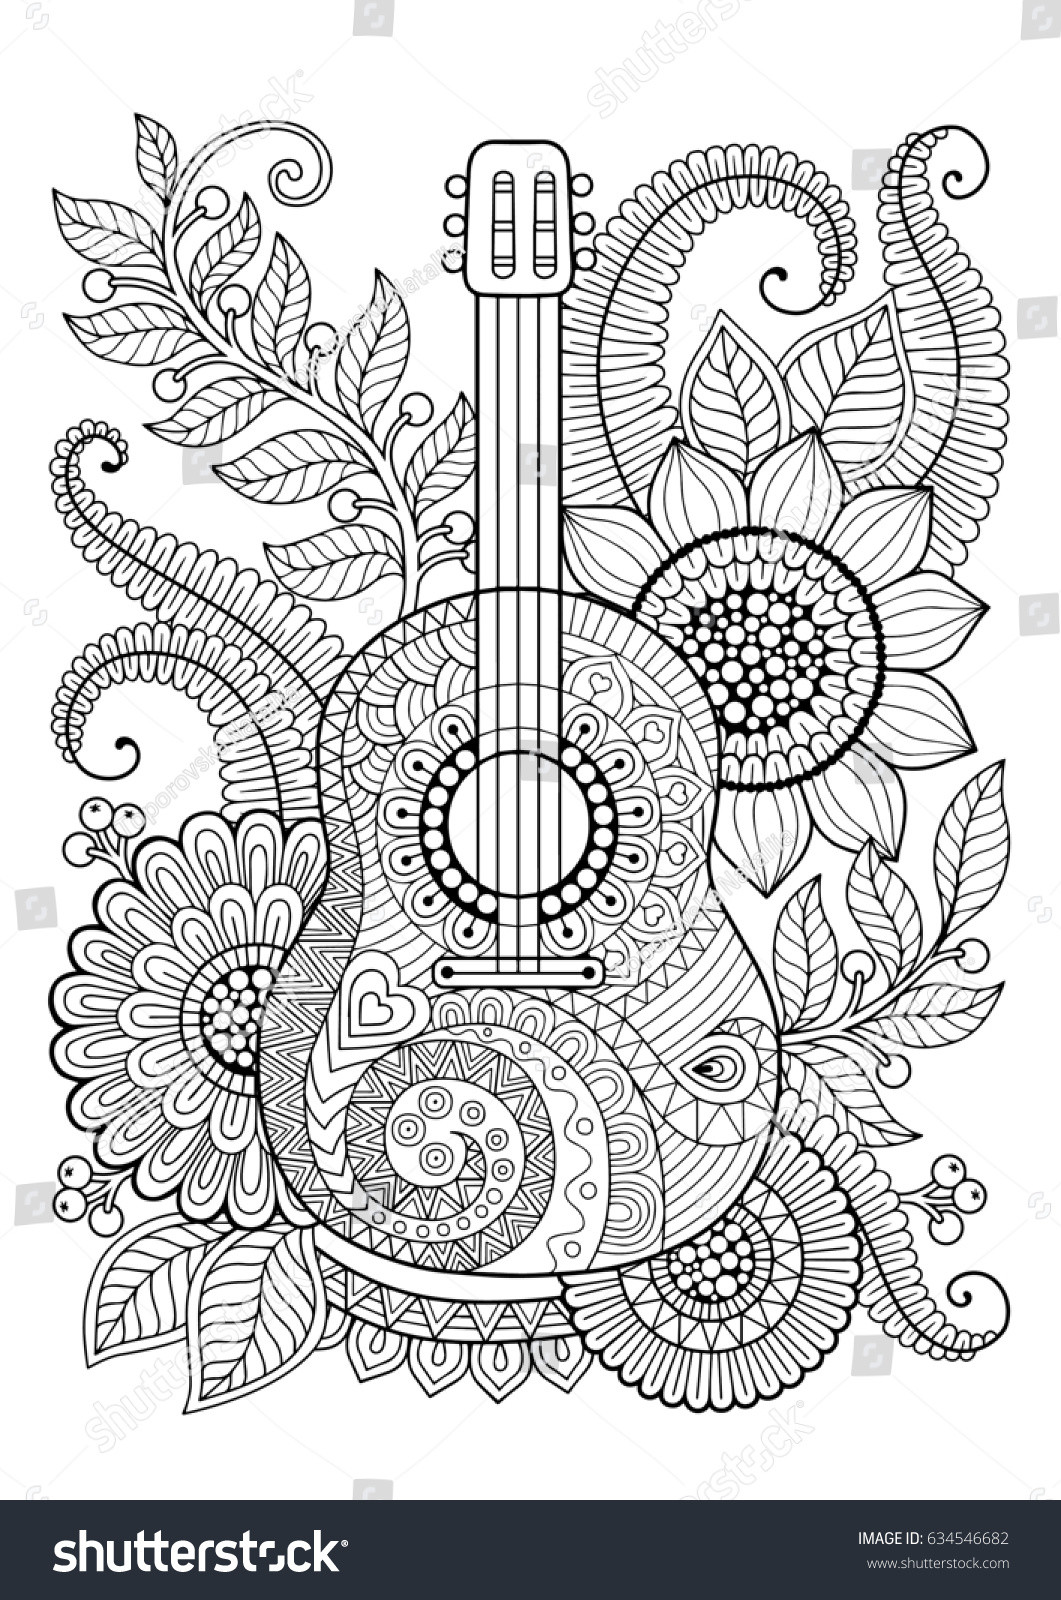 Guitar Coloring Pages For Adults
 Coloring Page Adult Antistress Relax Meditation Stock